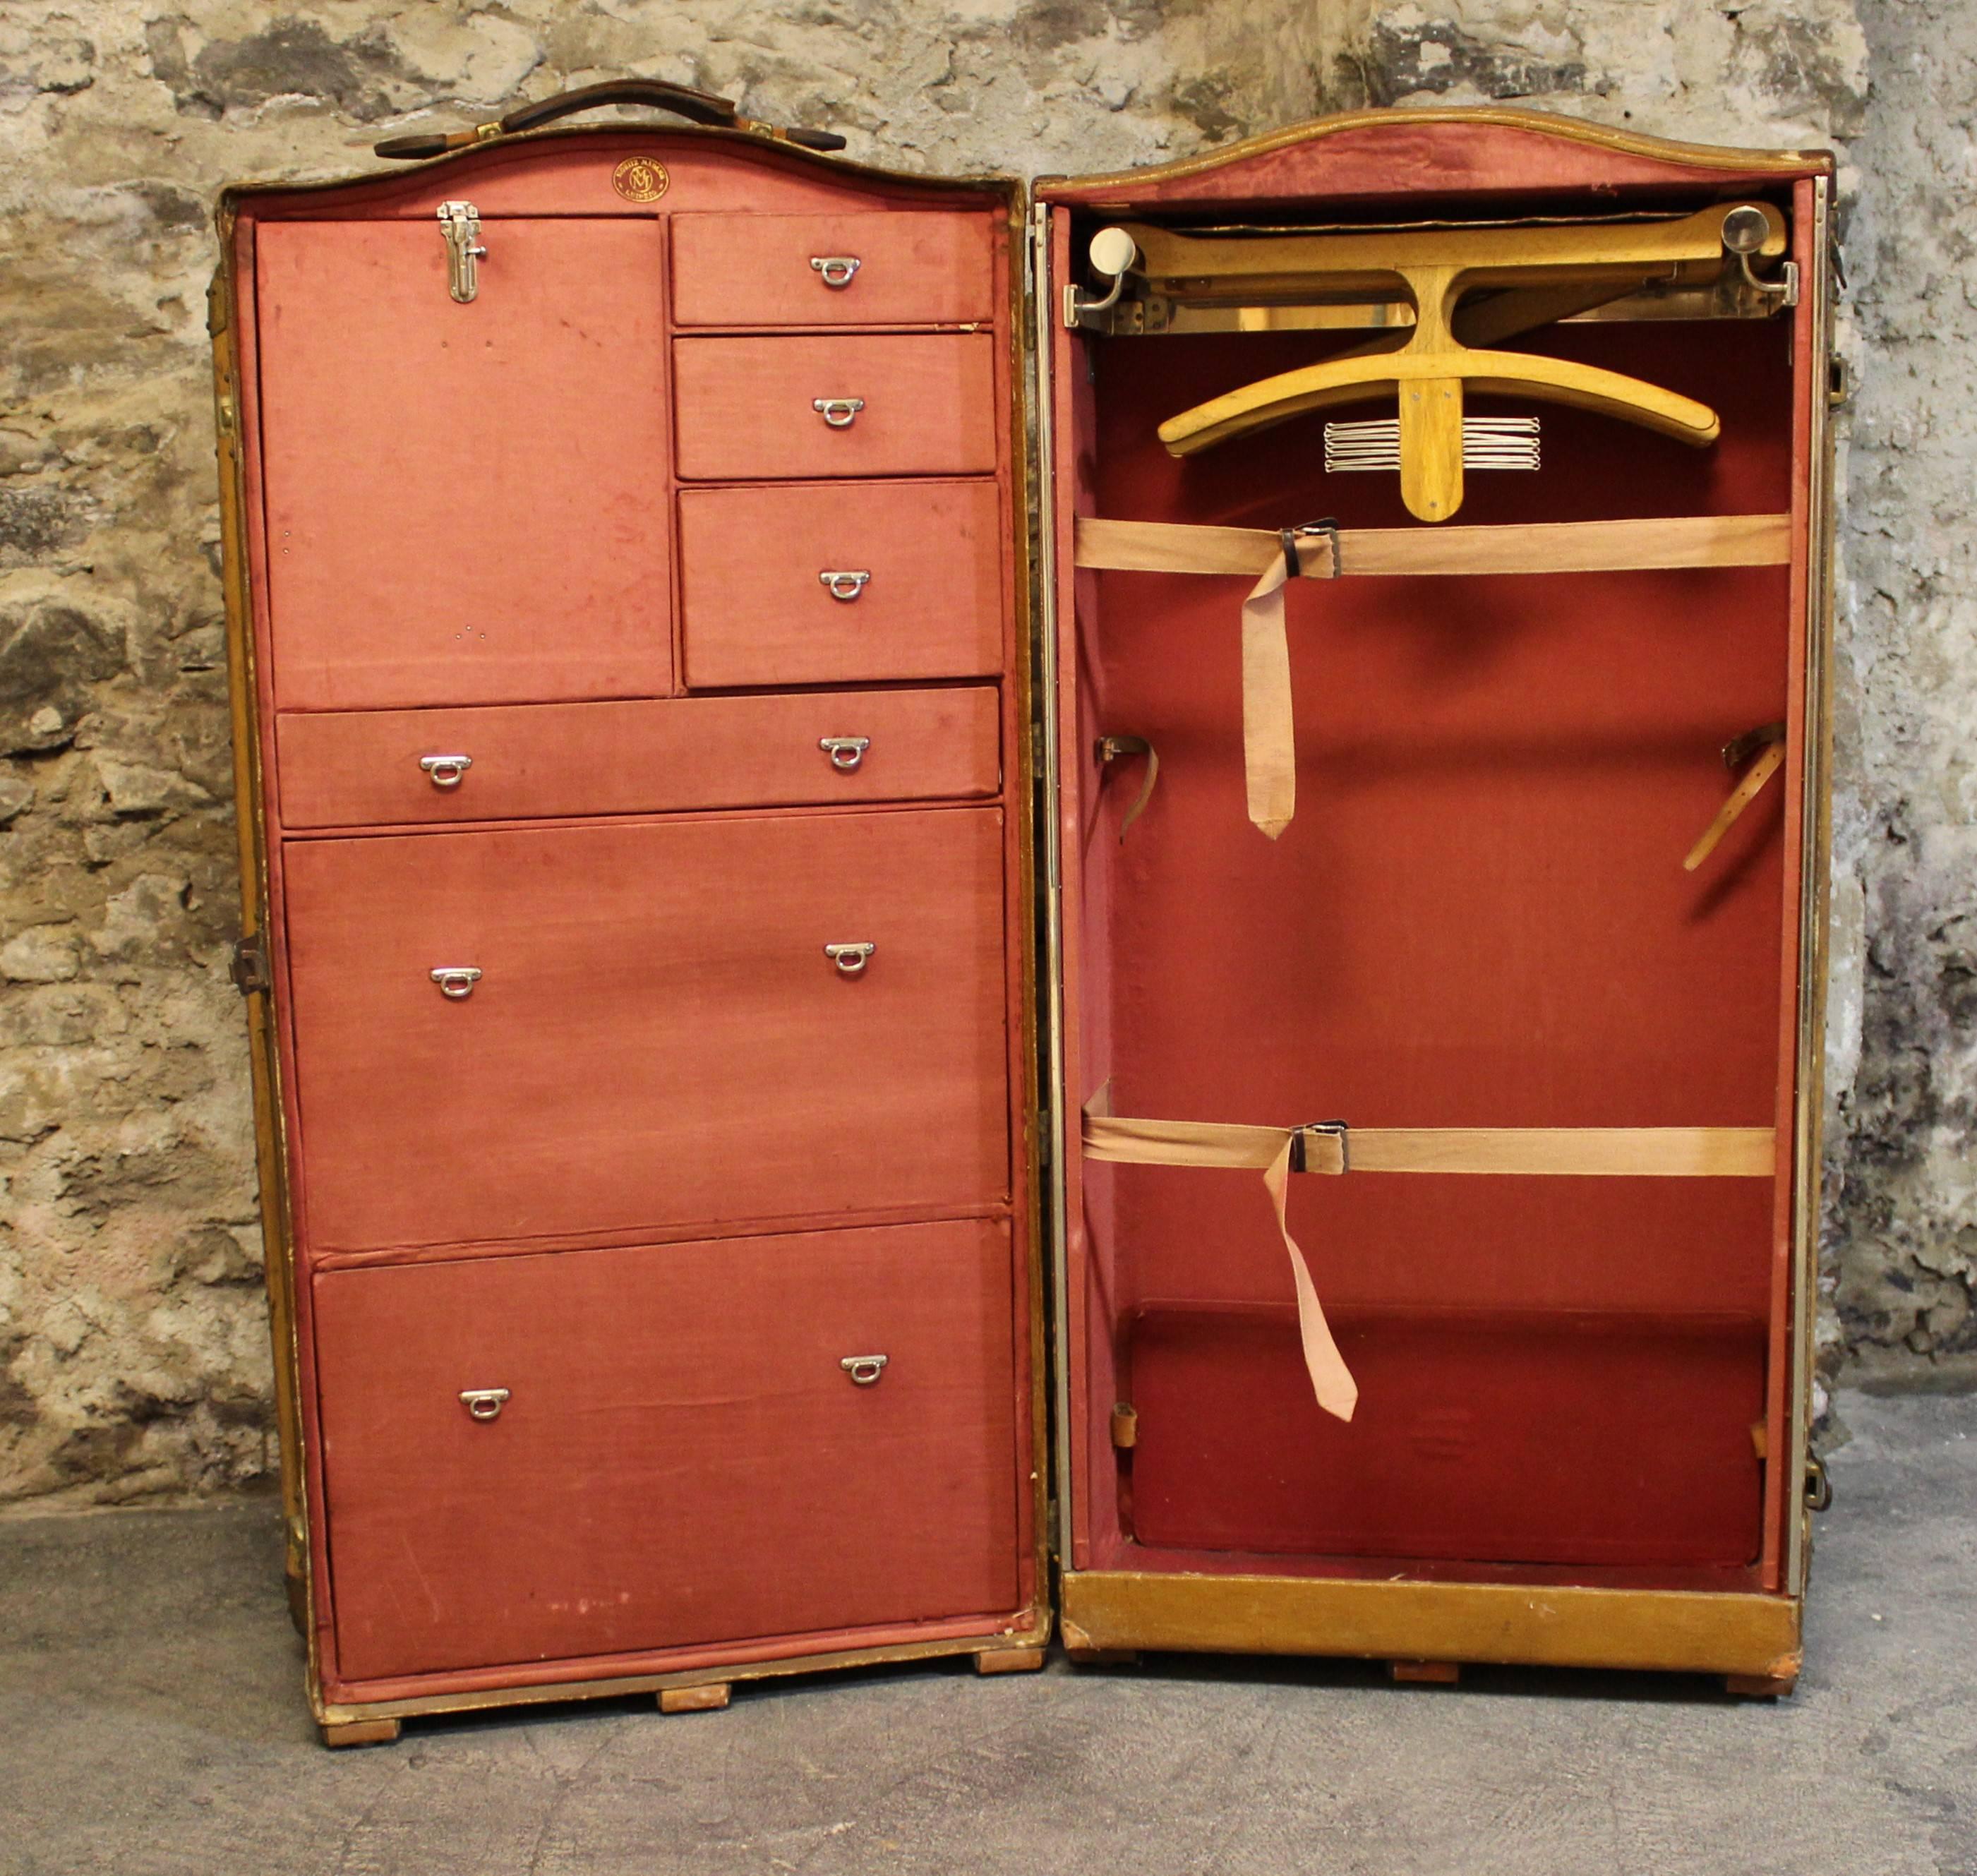 Moritz Madler double wardrobe trunk travelling suitcase.  The exterior is trimmed with leather, wood and brass hardware and it opens to an interior that holds multiple drawers on the left side and a hanging closet on the right. This beautiful German